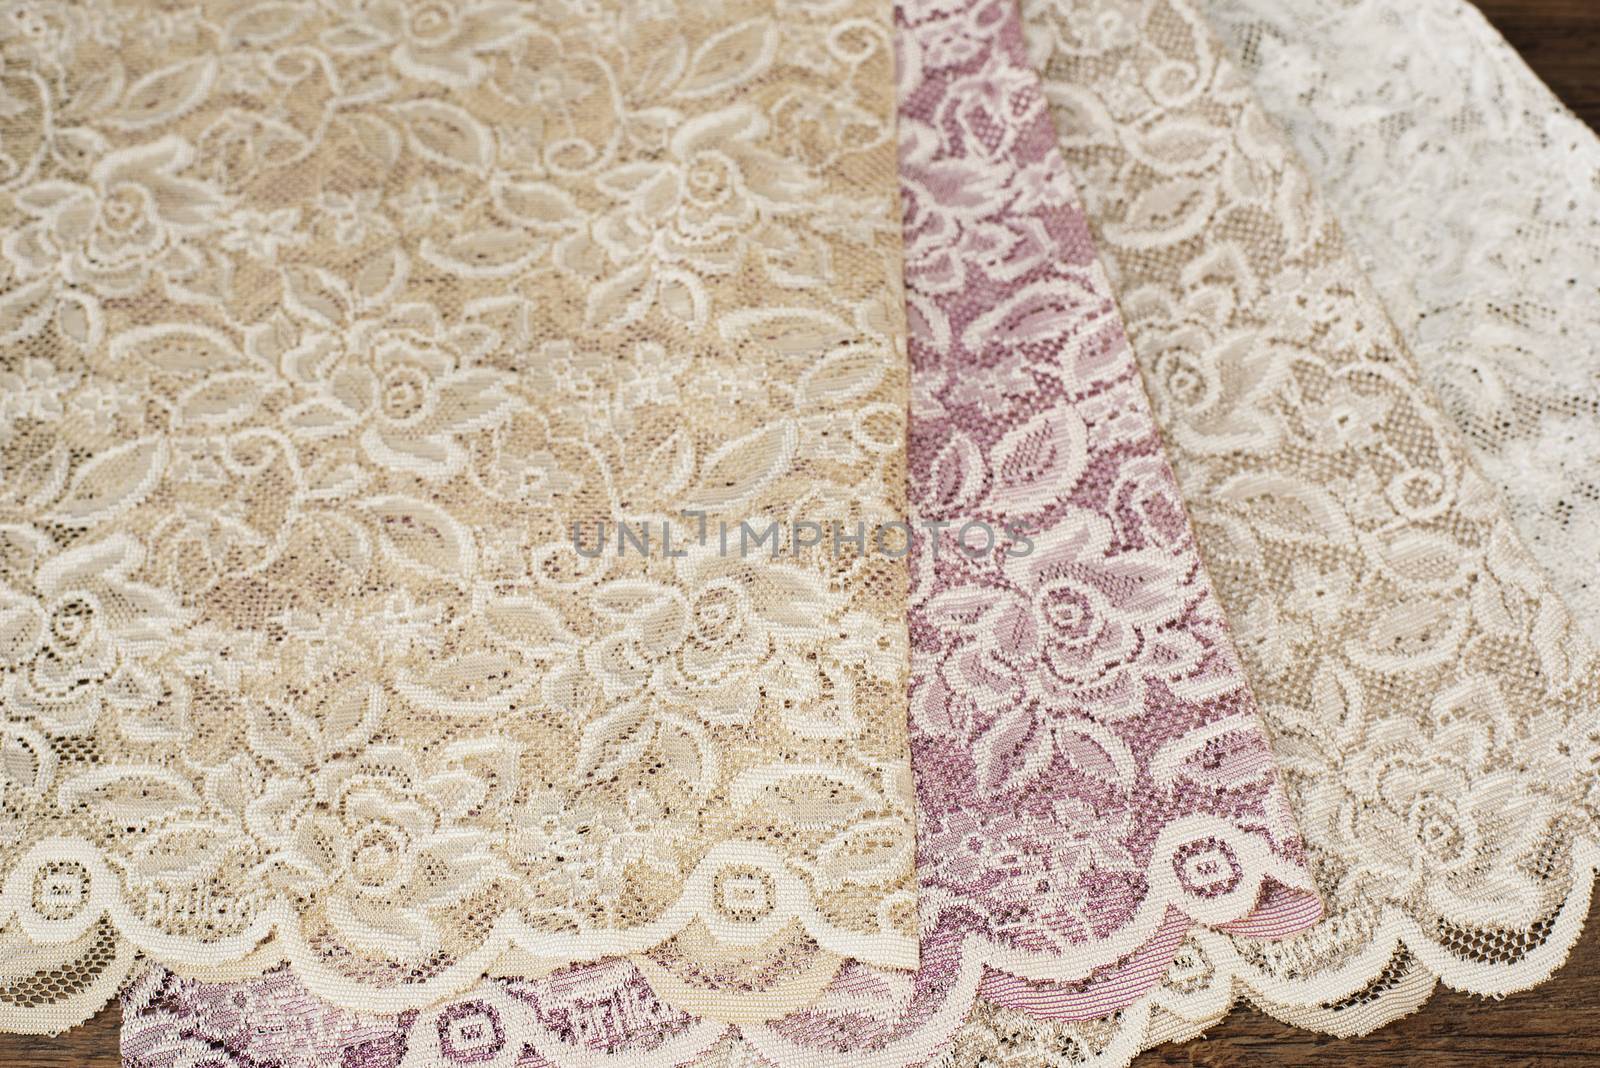 Close up of Beautiful Sheer Curtains Fabric Samples. Texture, Background, Pattern. Wedding Concept. Interior Design. Vintage Lace Tulle Chiffon ? White, Purple, Beige